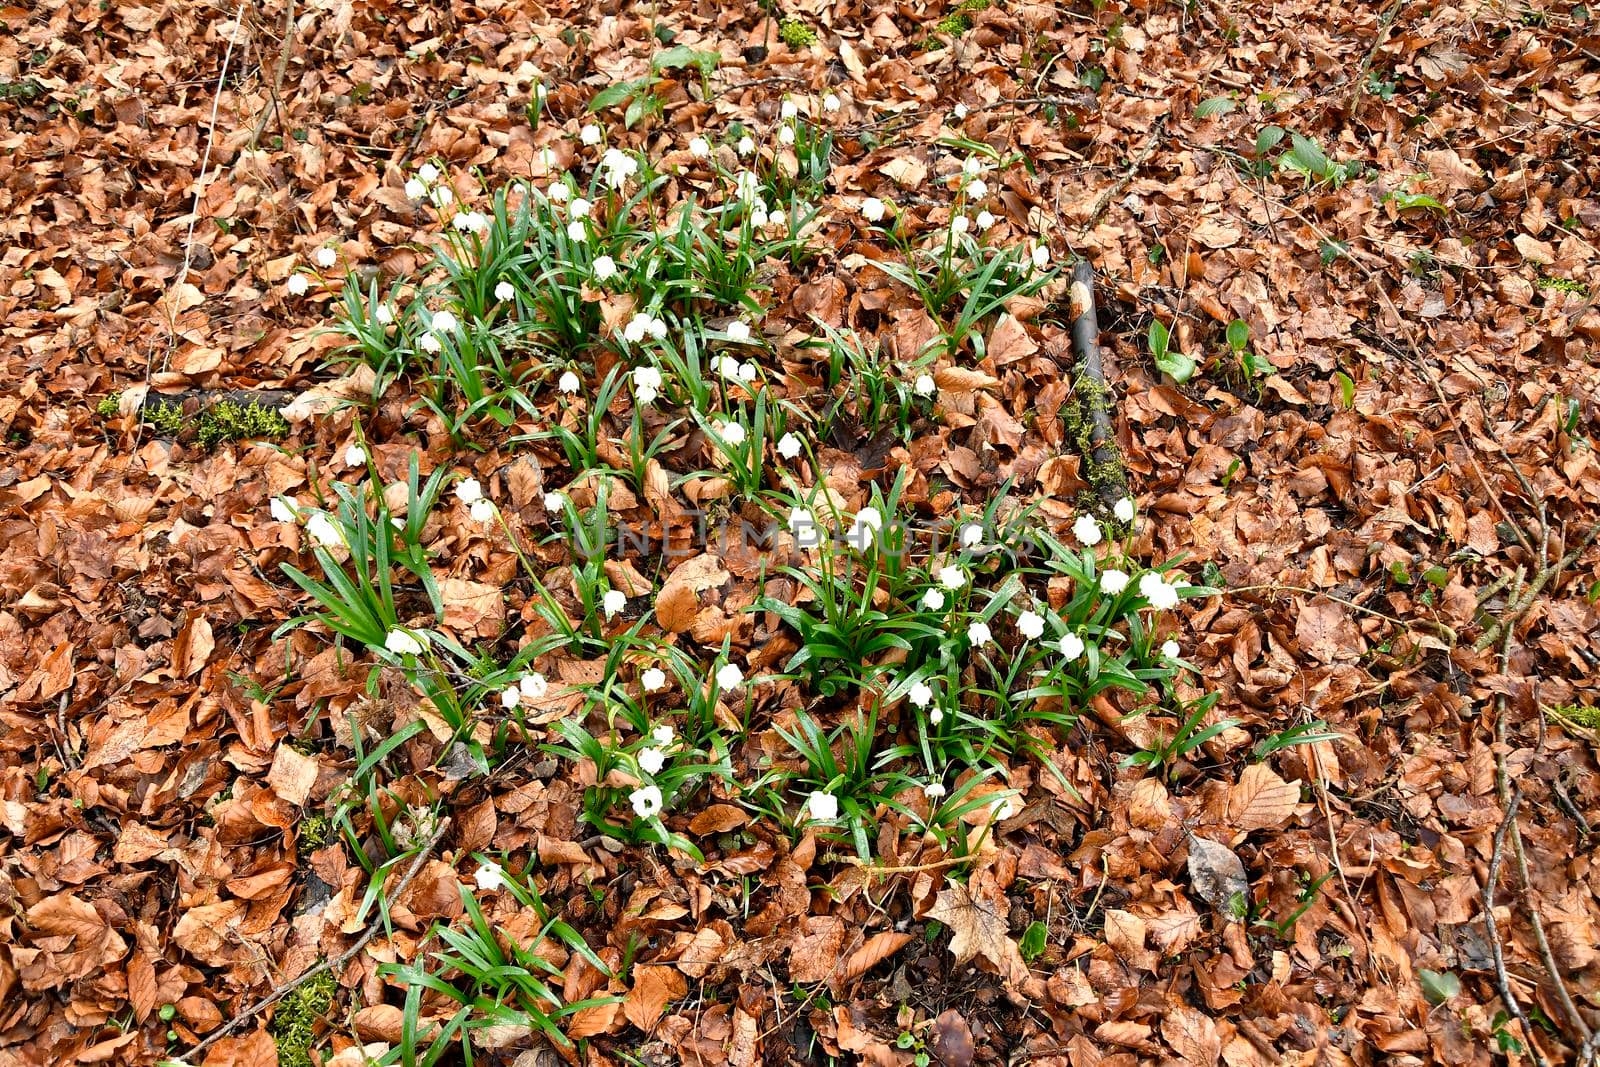 Snowflake, early spring flower in the Autal, Bad Ueberkingen, Germany